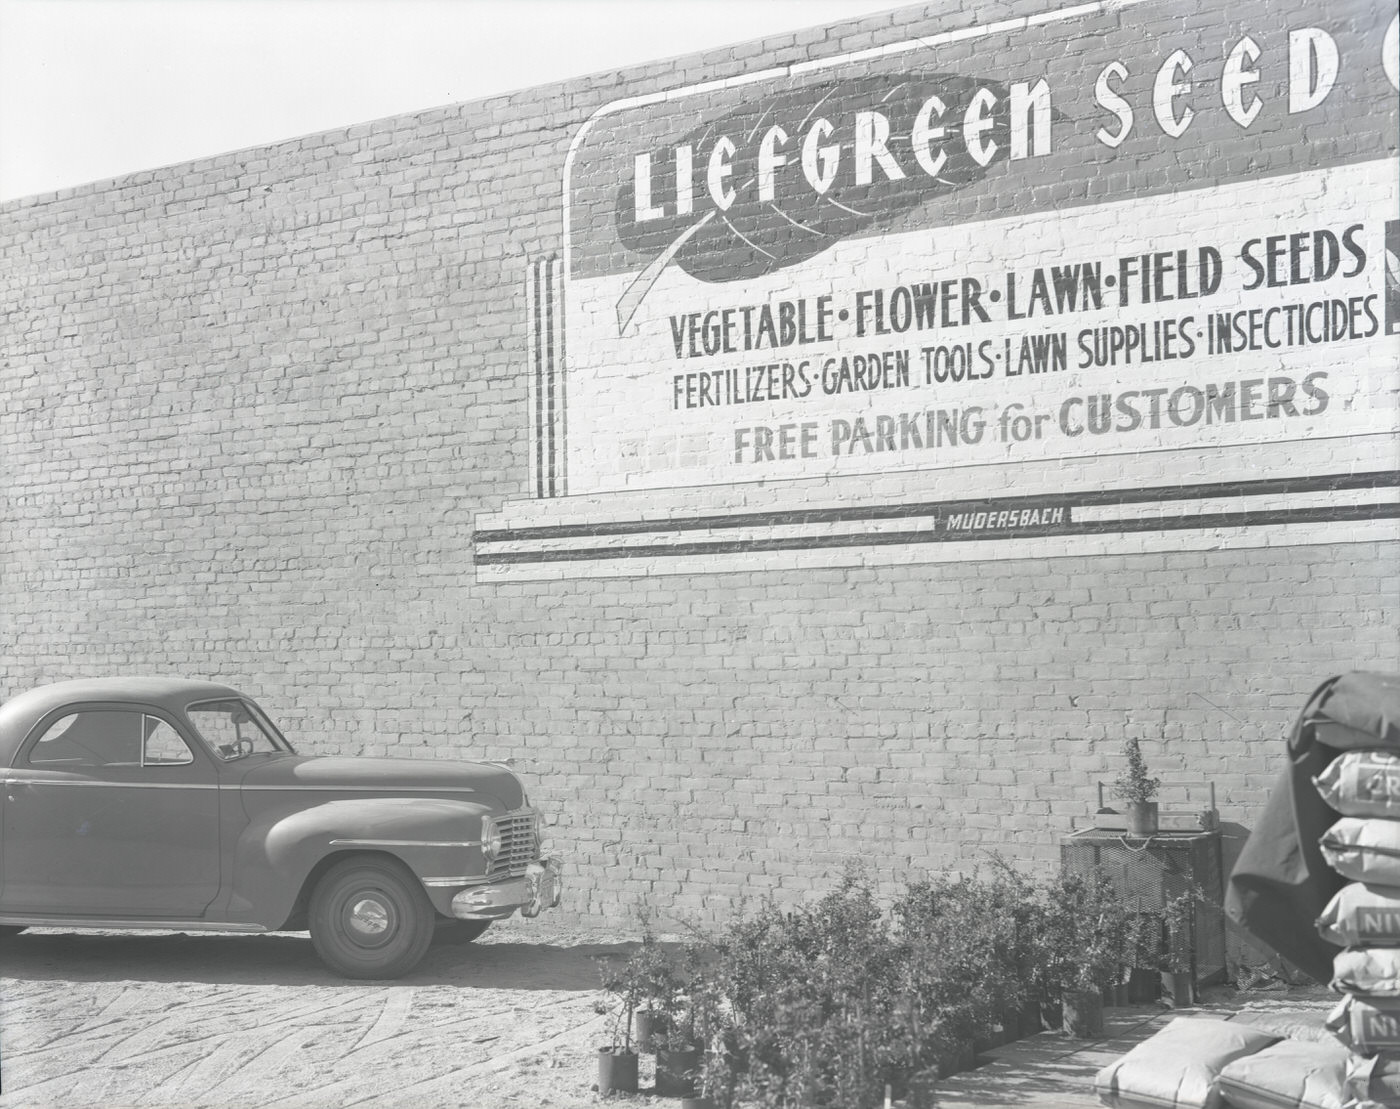 Liefgreen Seed Co. Store Exterior, 1943